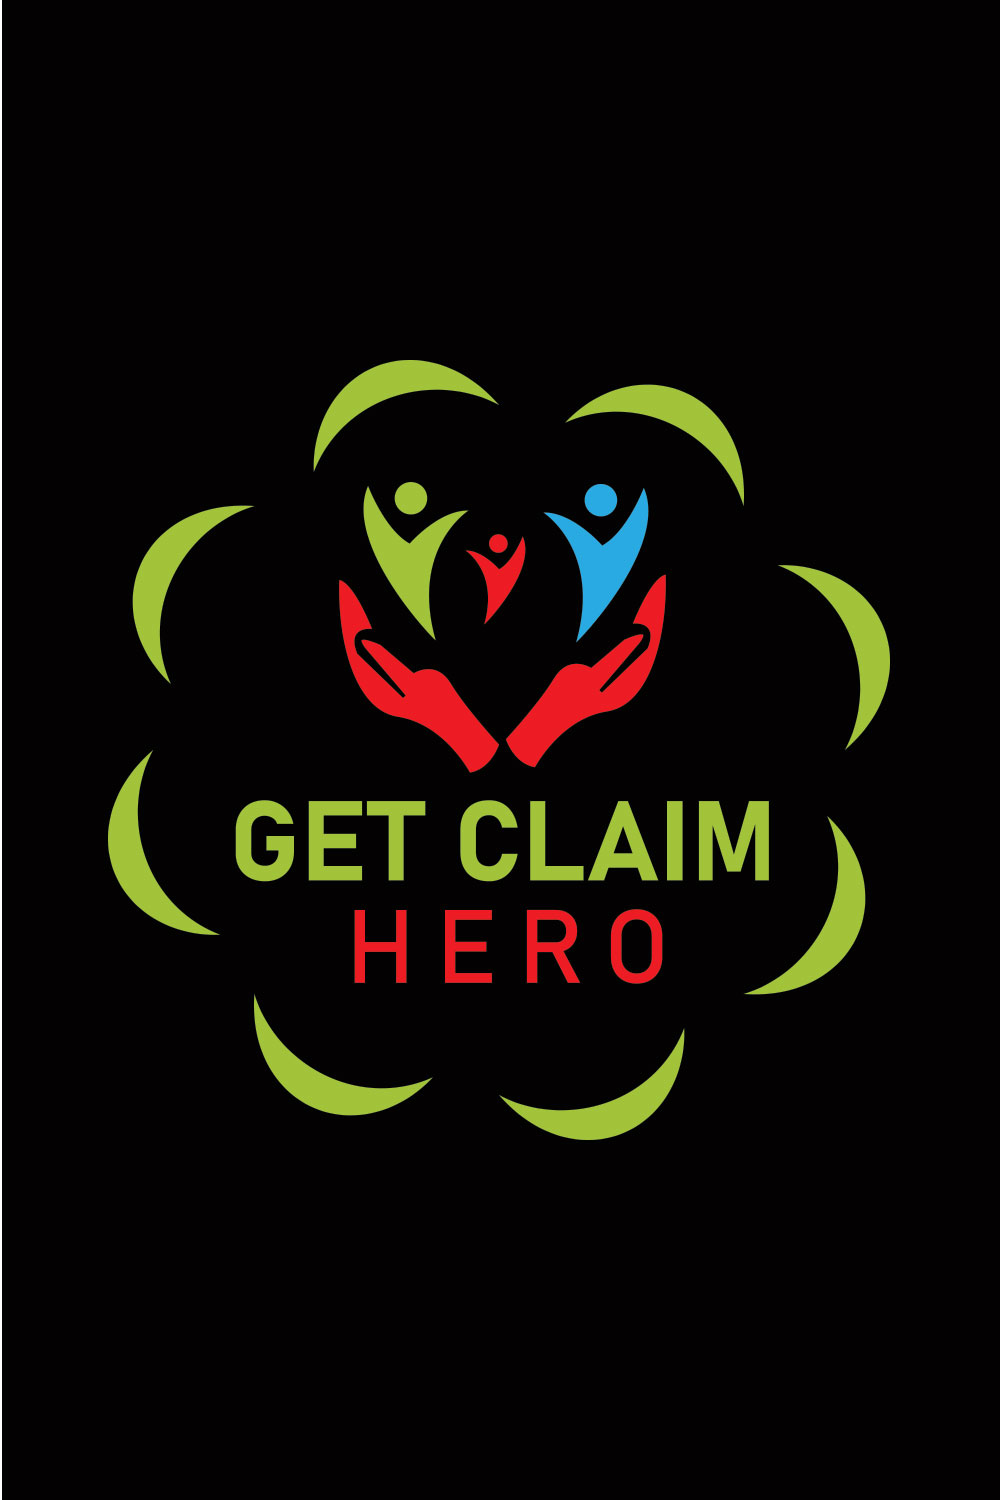 GET CLAIM HERO pinterest preview image.